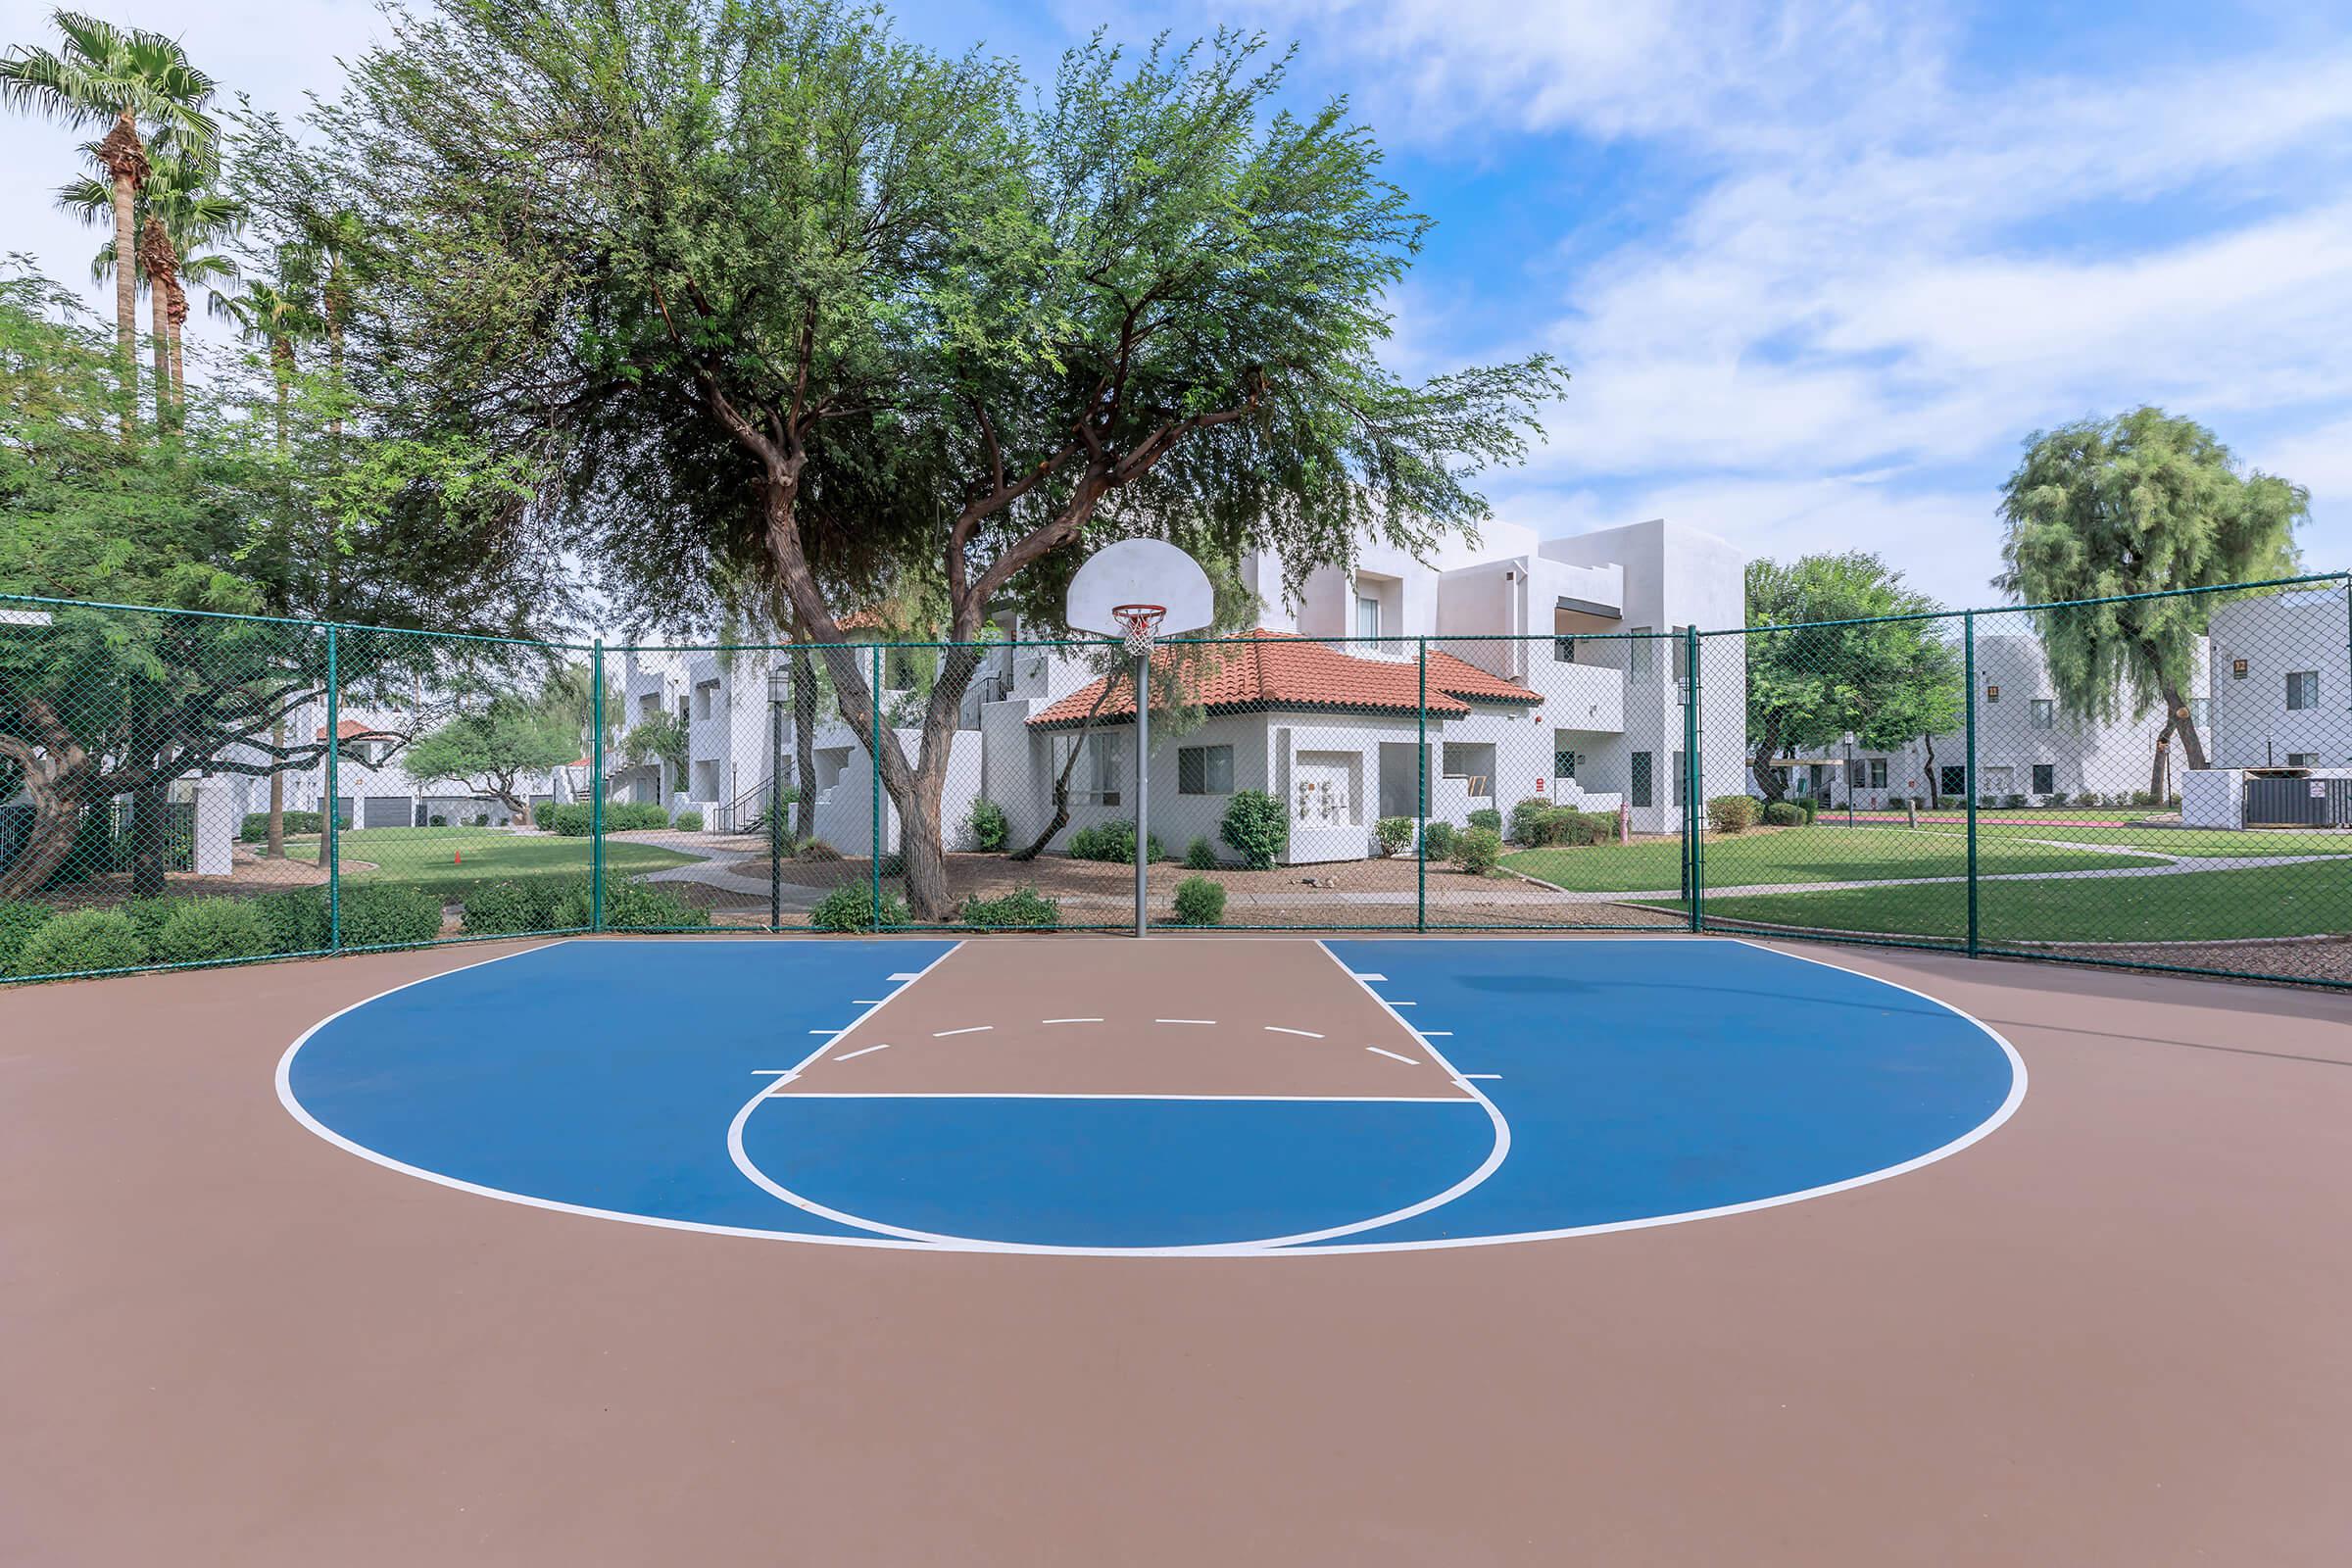 a pool next to a basketball court